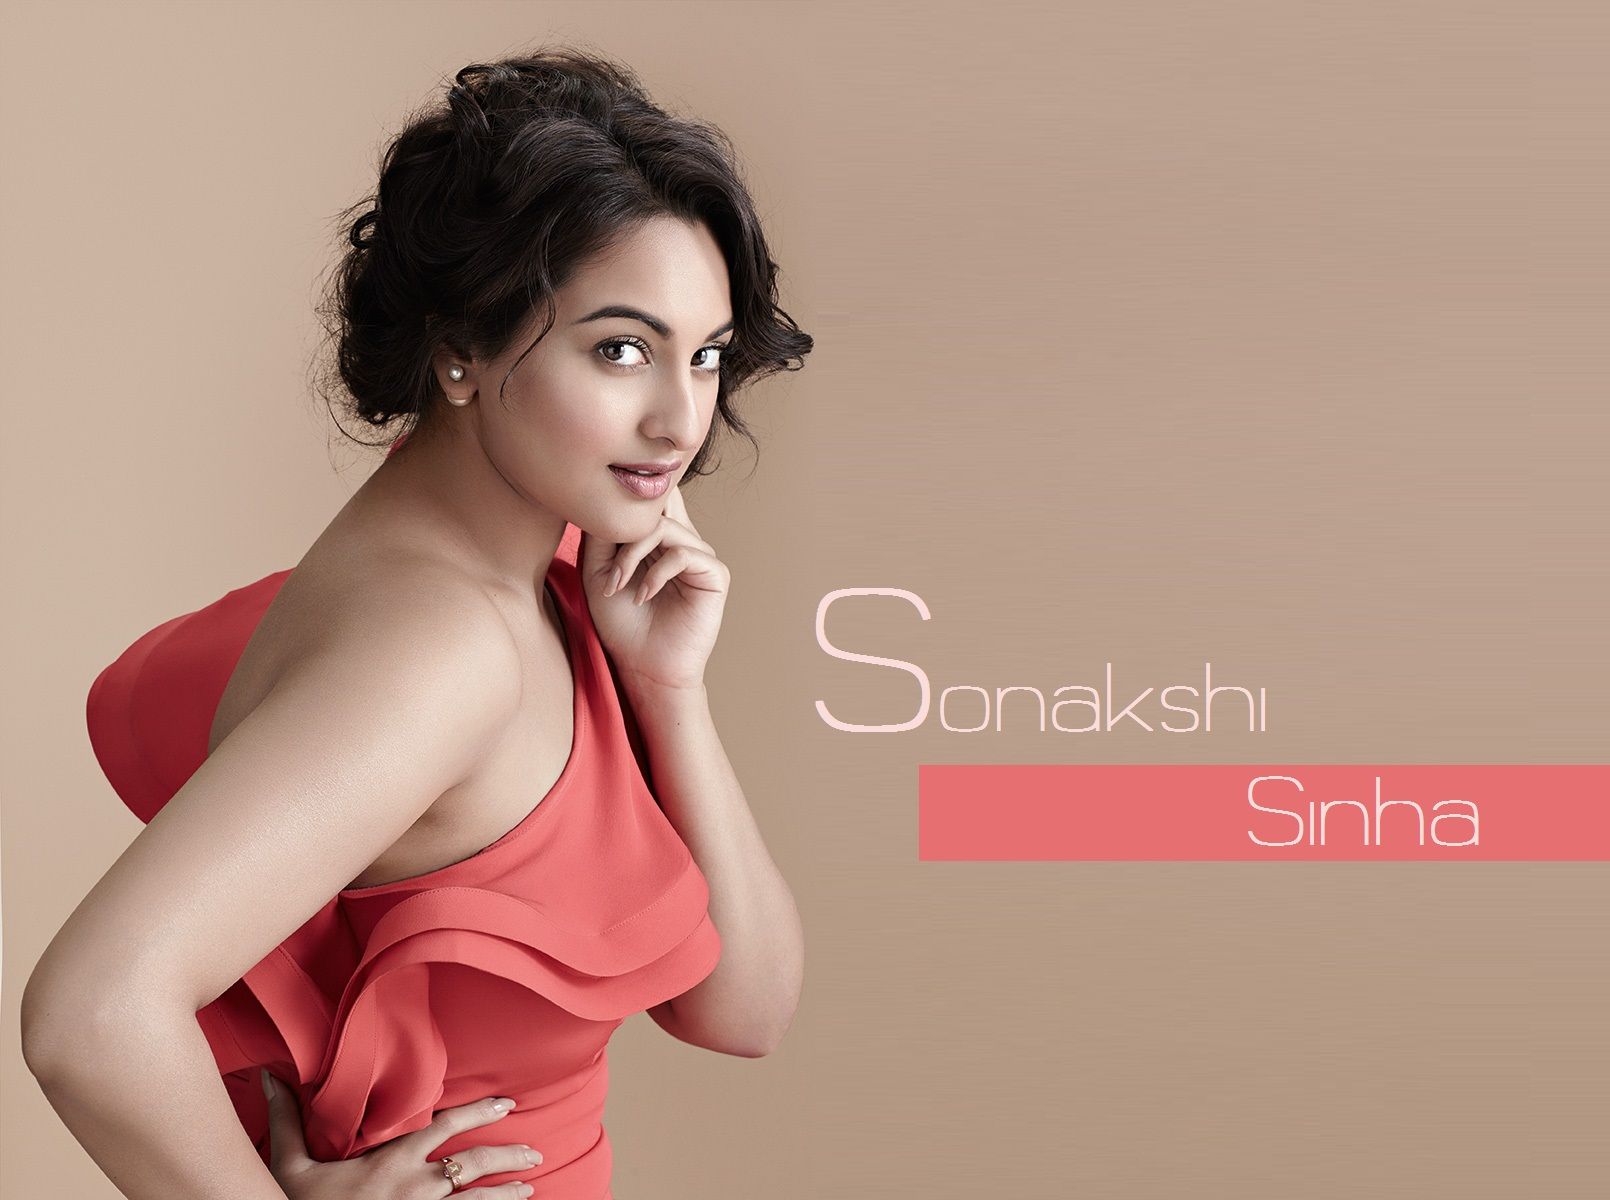 Latest Collections of Sonakshi Sinha hd wallpapers for free